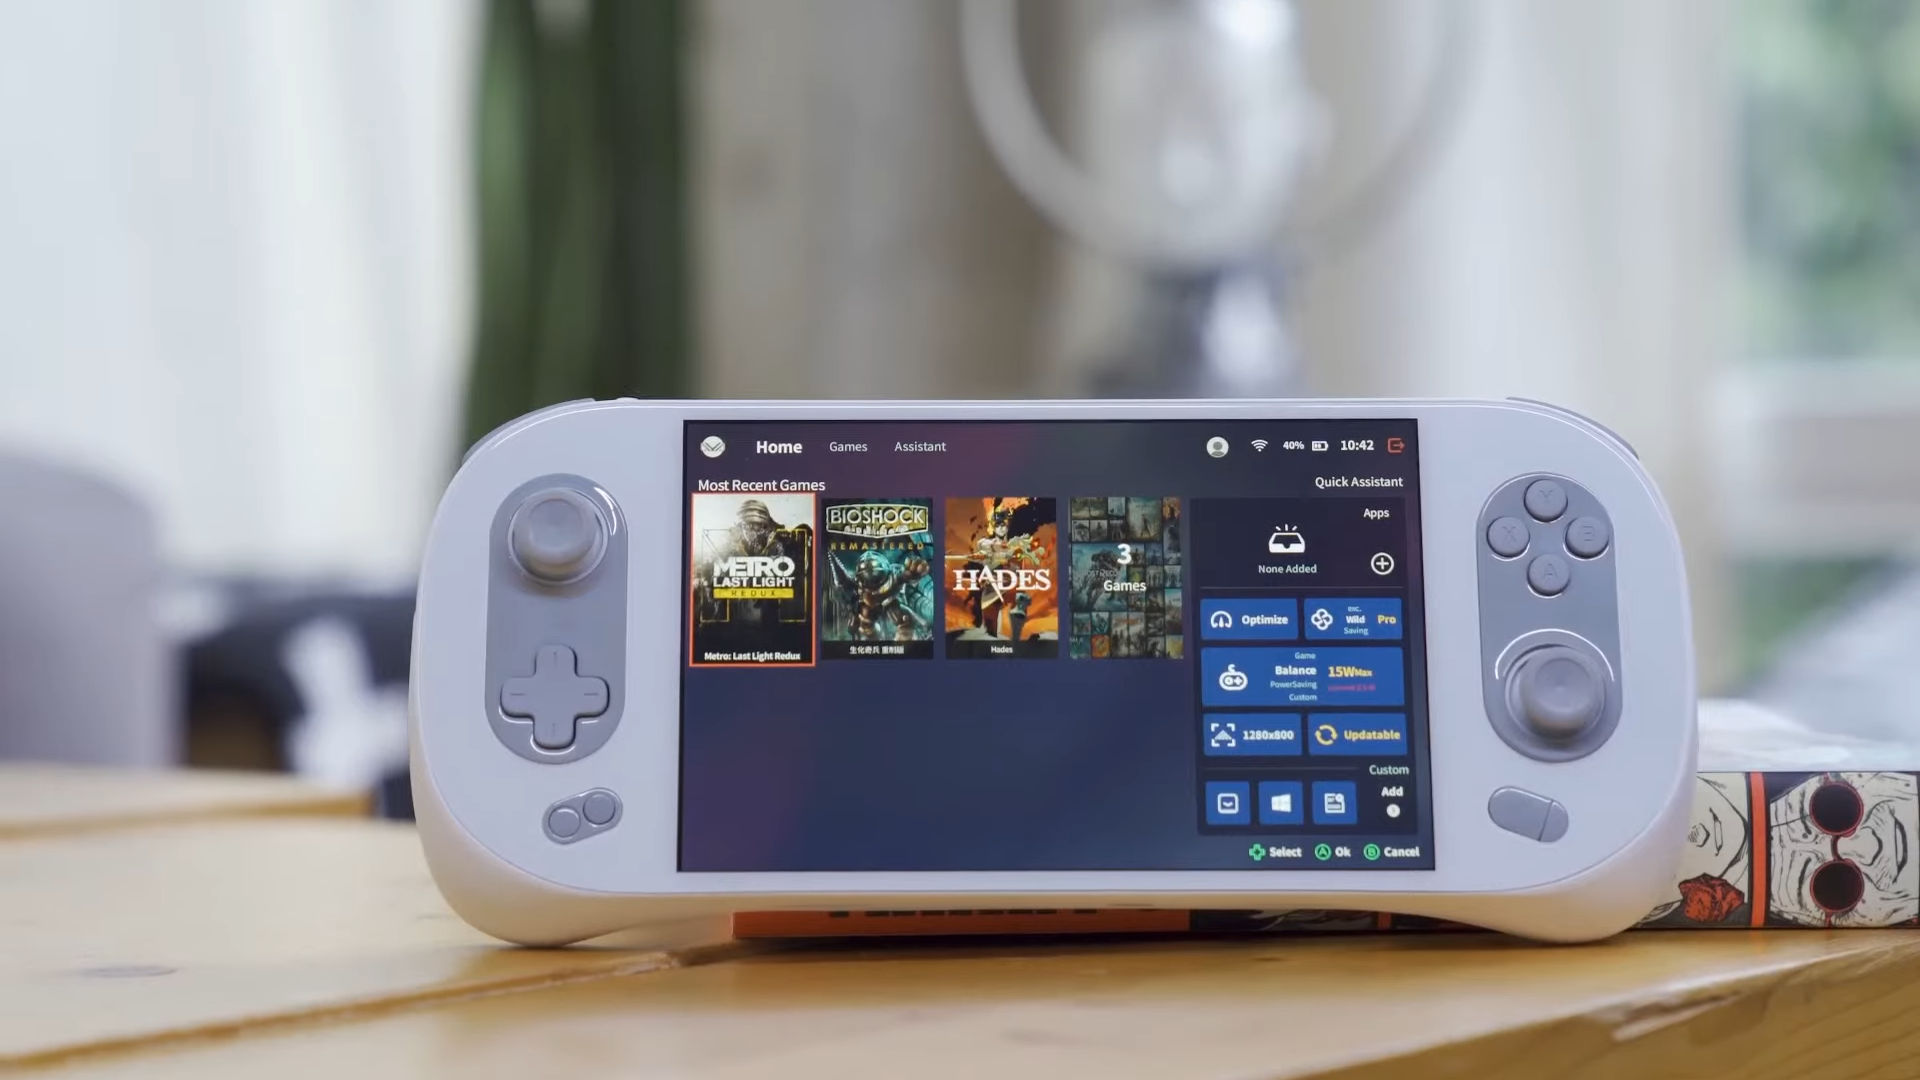 Aya Neo Founder launched, a handheld gaming console with AMD Ryzen